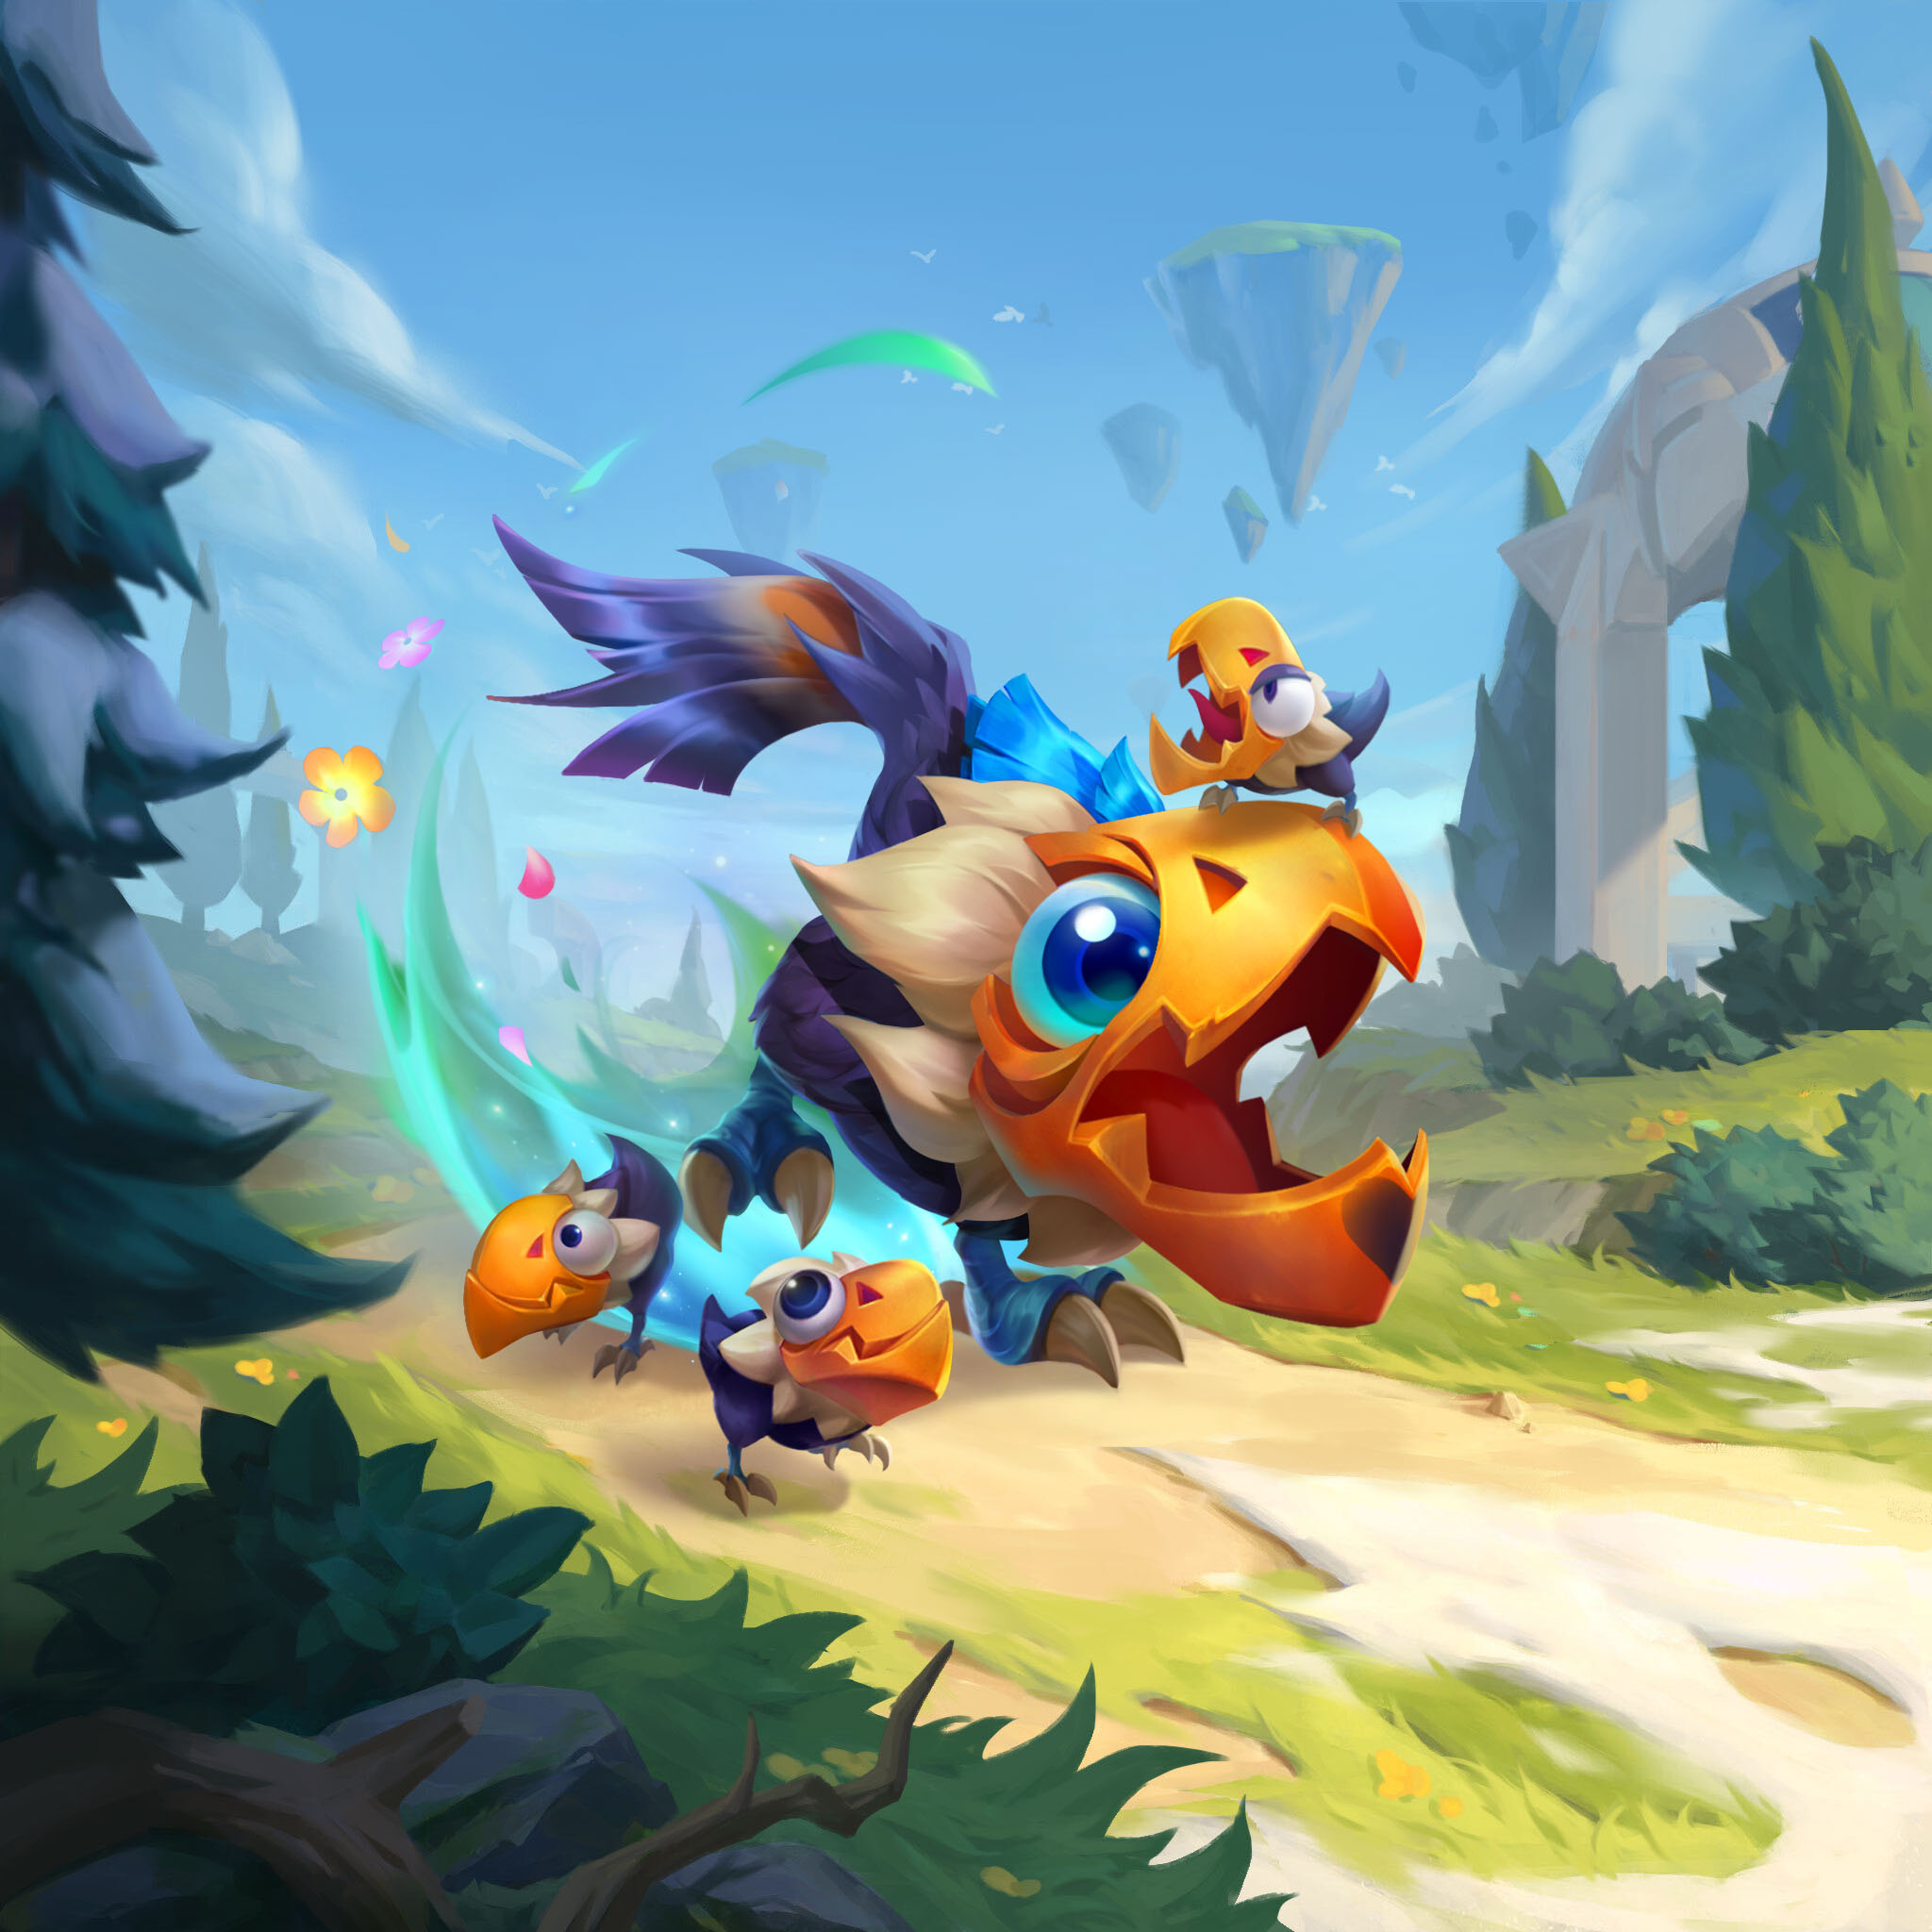 TFT 13.22 Full Patch Notes - Overtime Rework, Trait Changes and